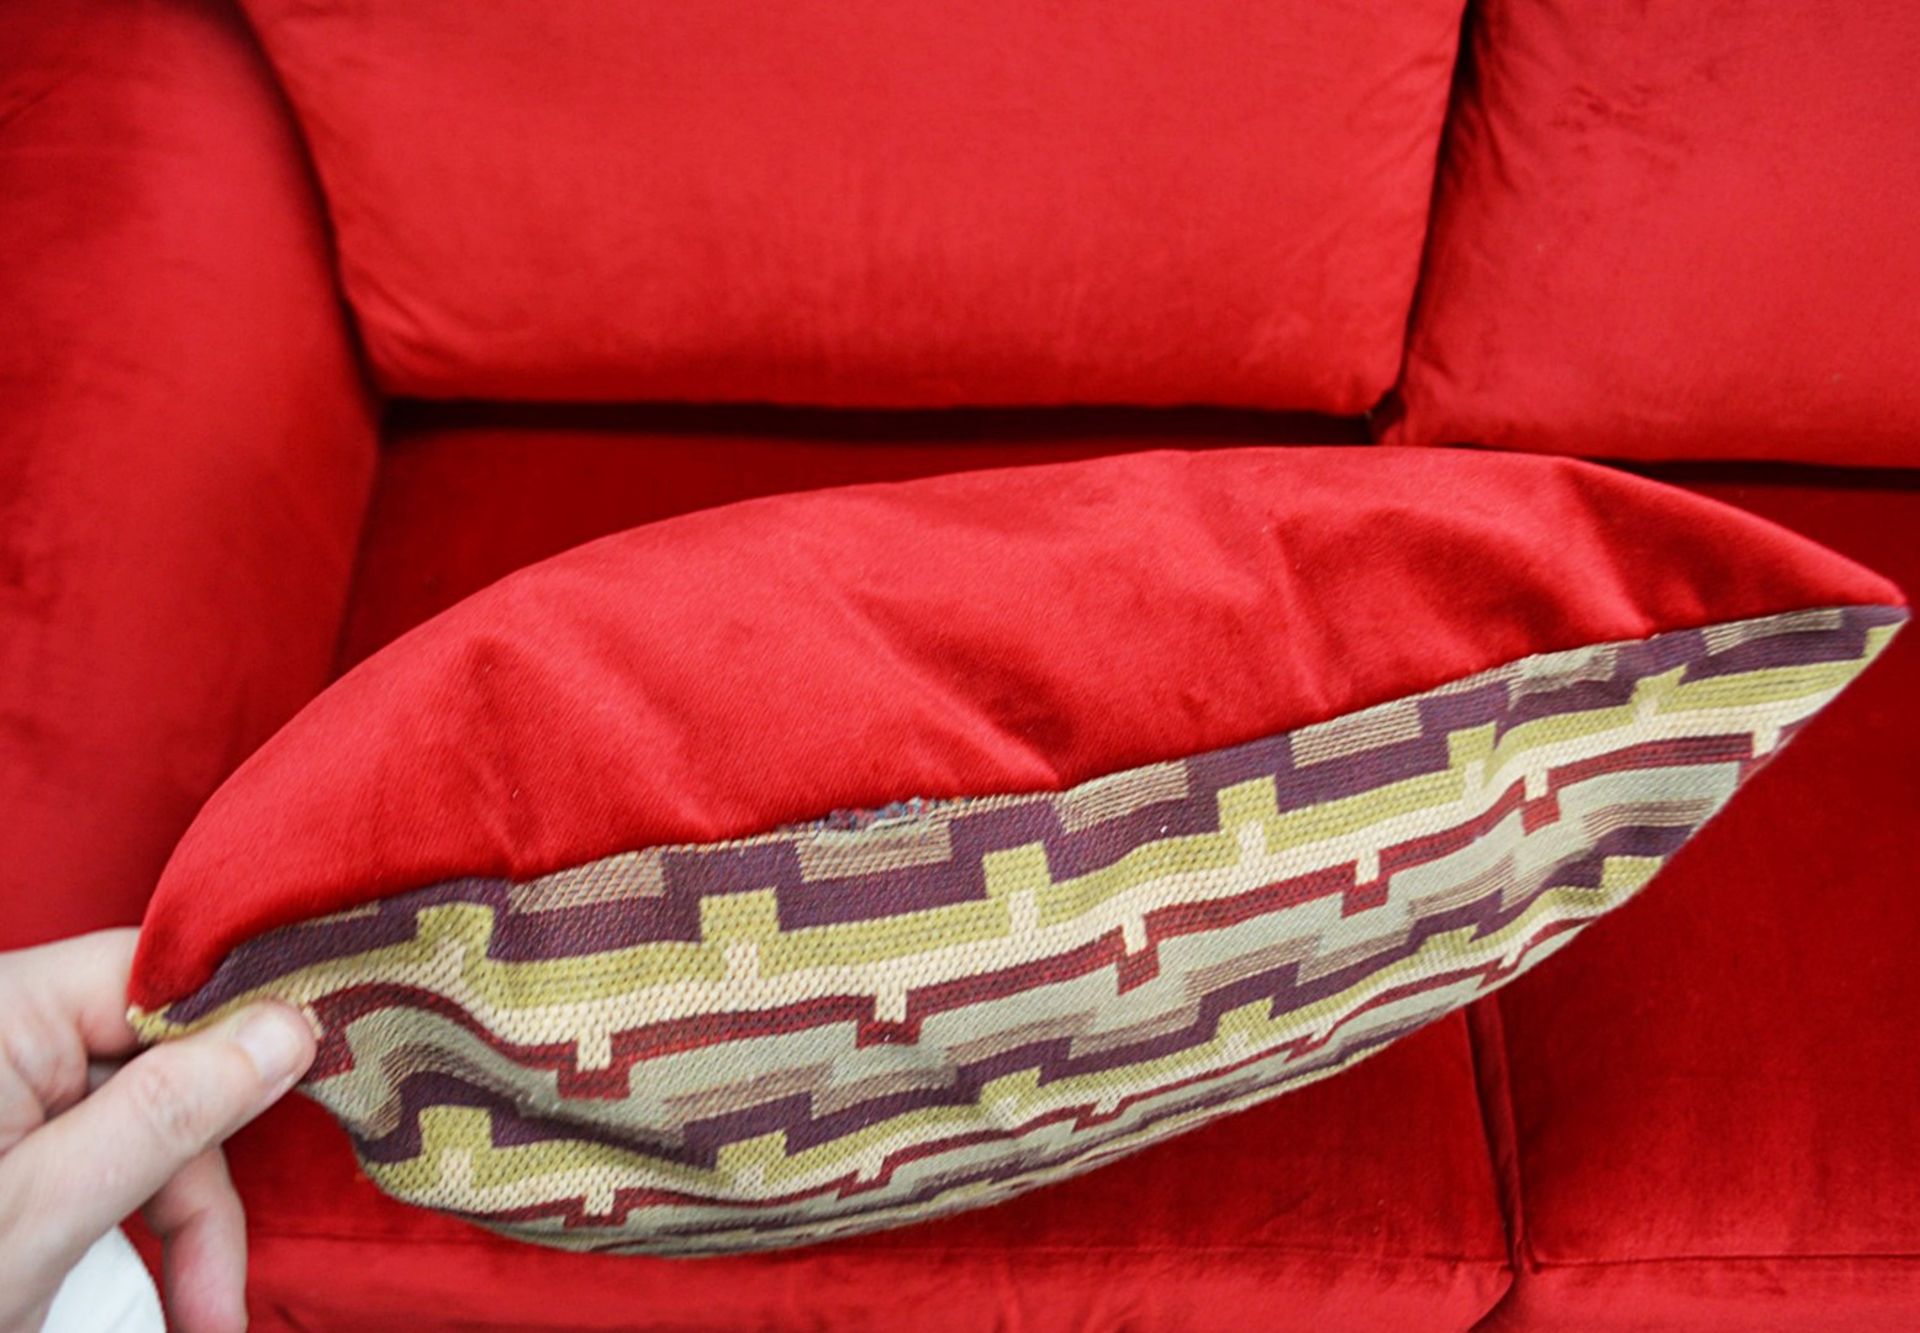 1 x Bespoke 2-Seater Commercial Sofa In A Bright Red Velvet With Complimenting Cushion - - Image 3 of 6